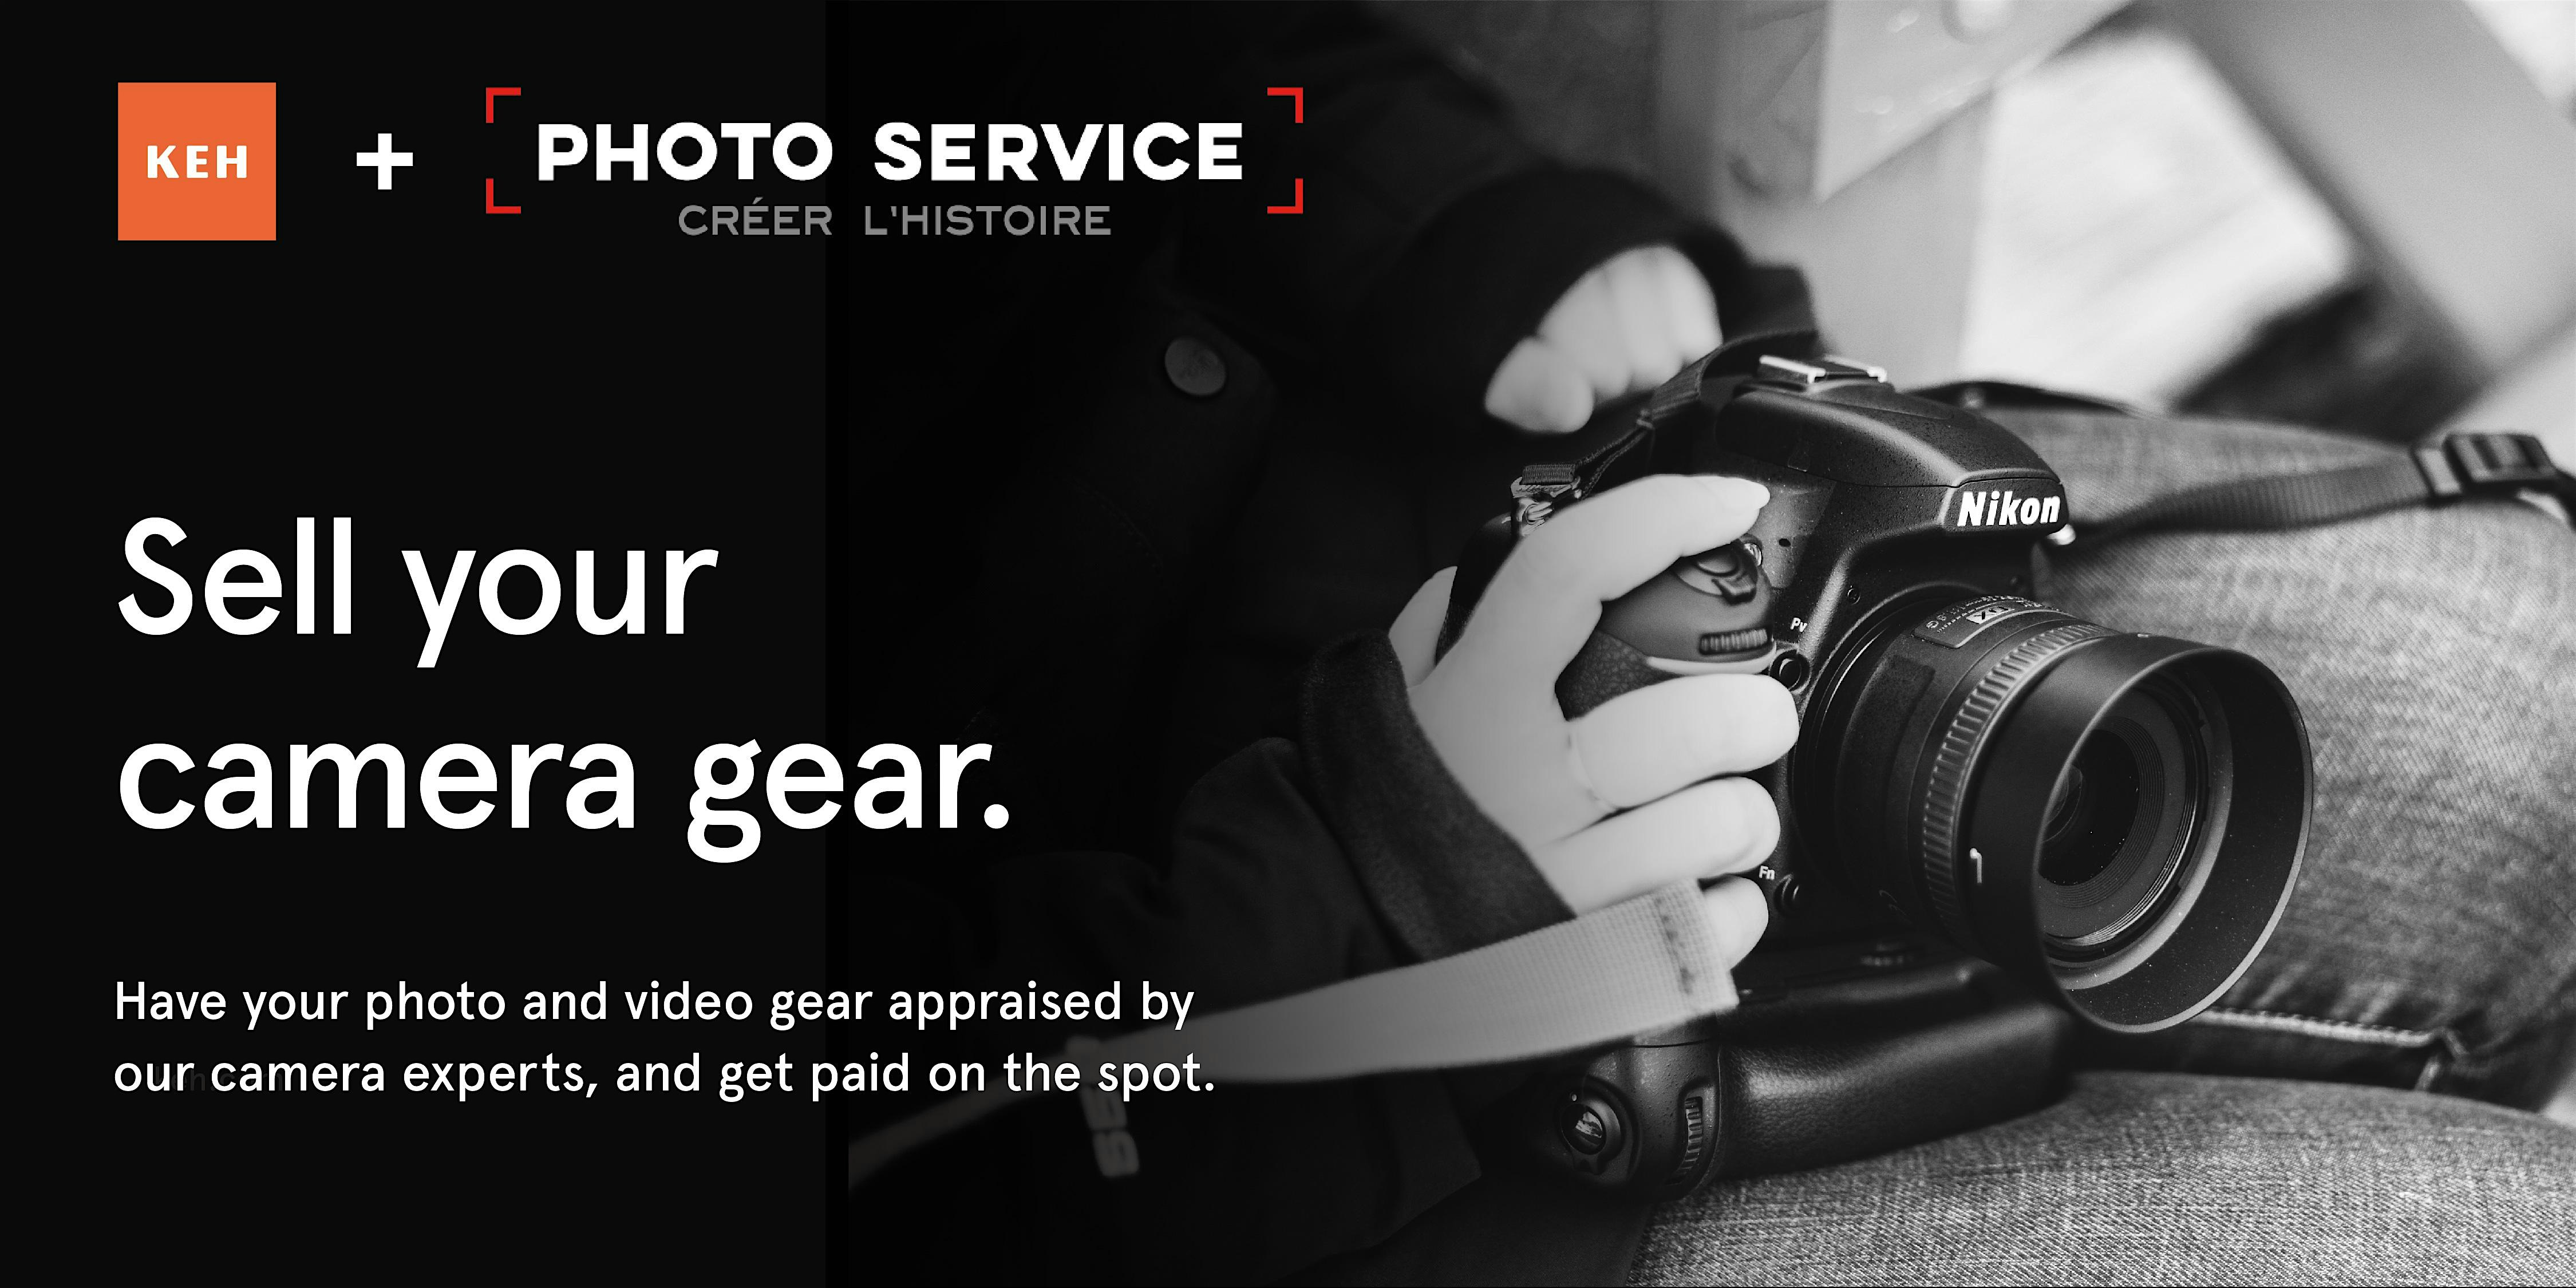 Sell your camera gear (free event) at Photo Service